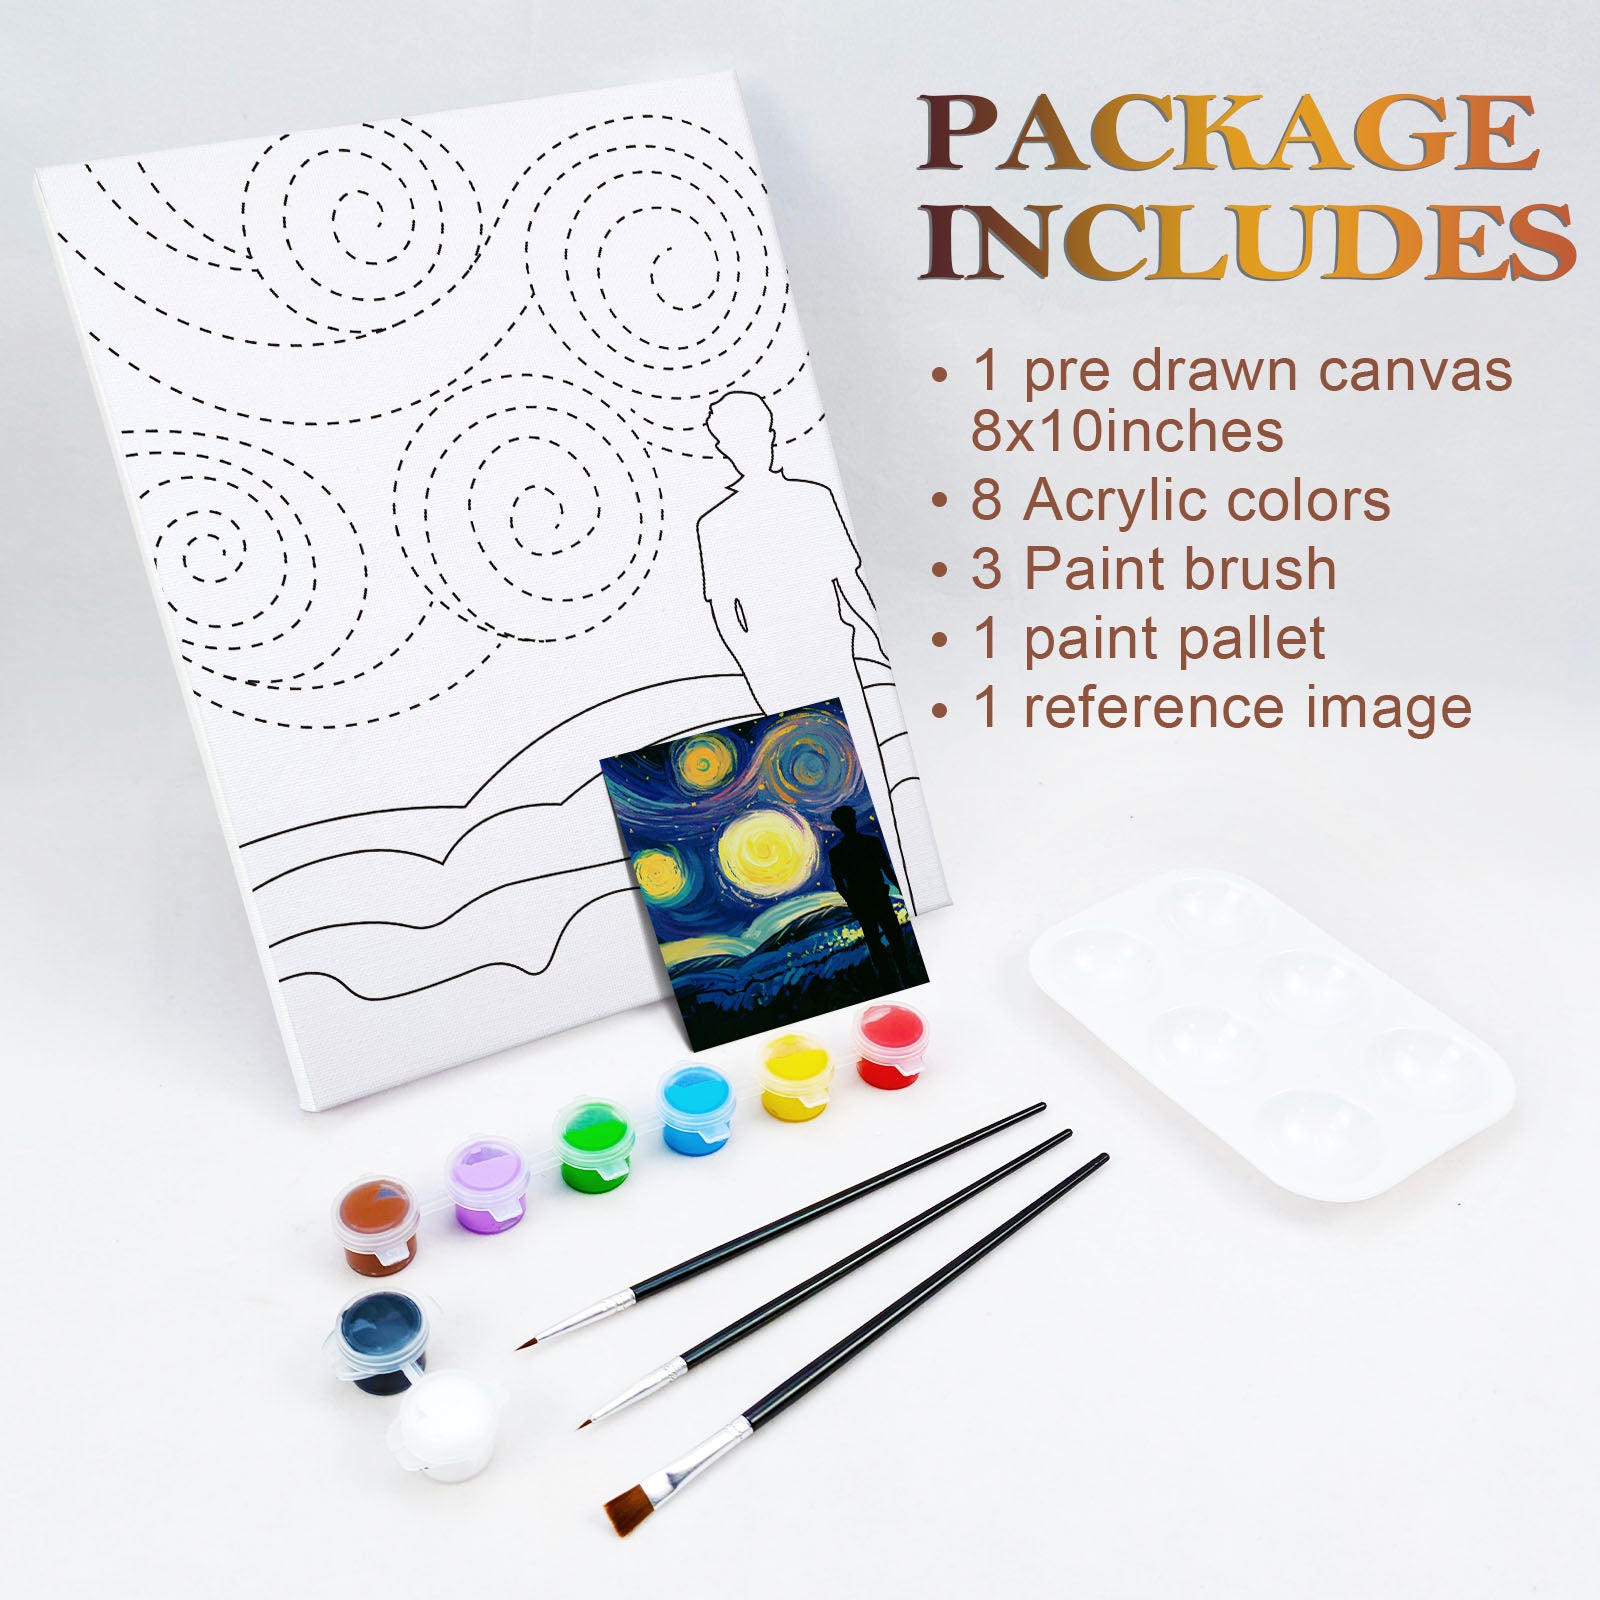  VOCHIC Canvas Painting Kit Pre Drawn Canvas for Painting for  Adults Party Kits Paint and Sip Party Supplies 8x10 Canvas to Paint 8  Acrylic Colors,3 Brush,1 Pallet Chic Girl Art Set 